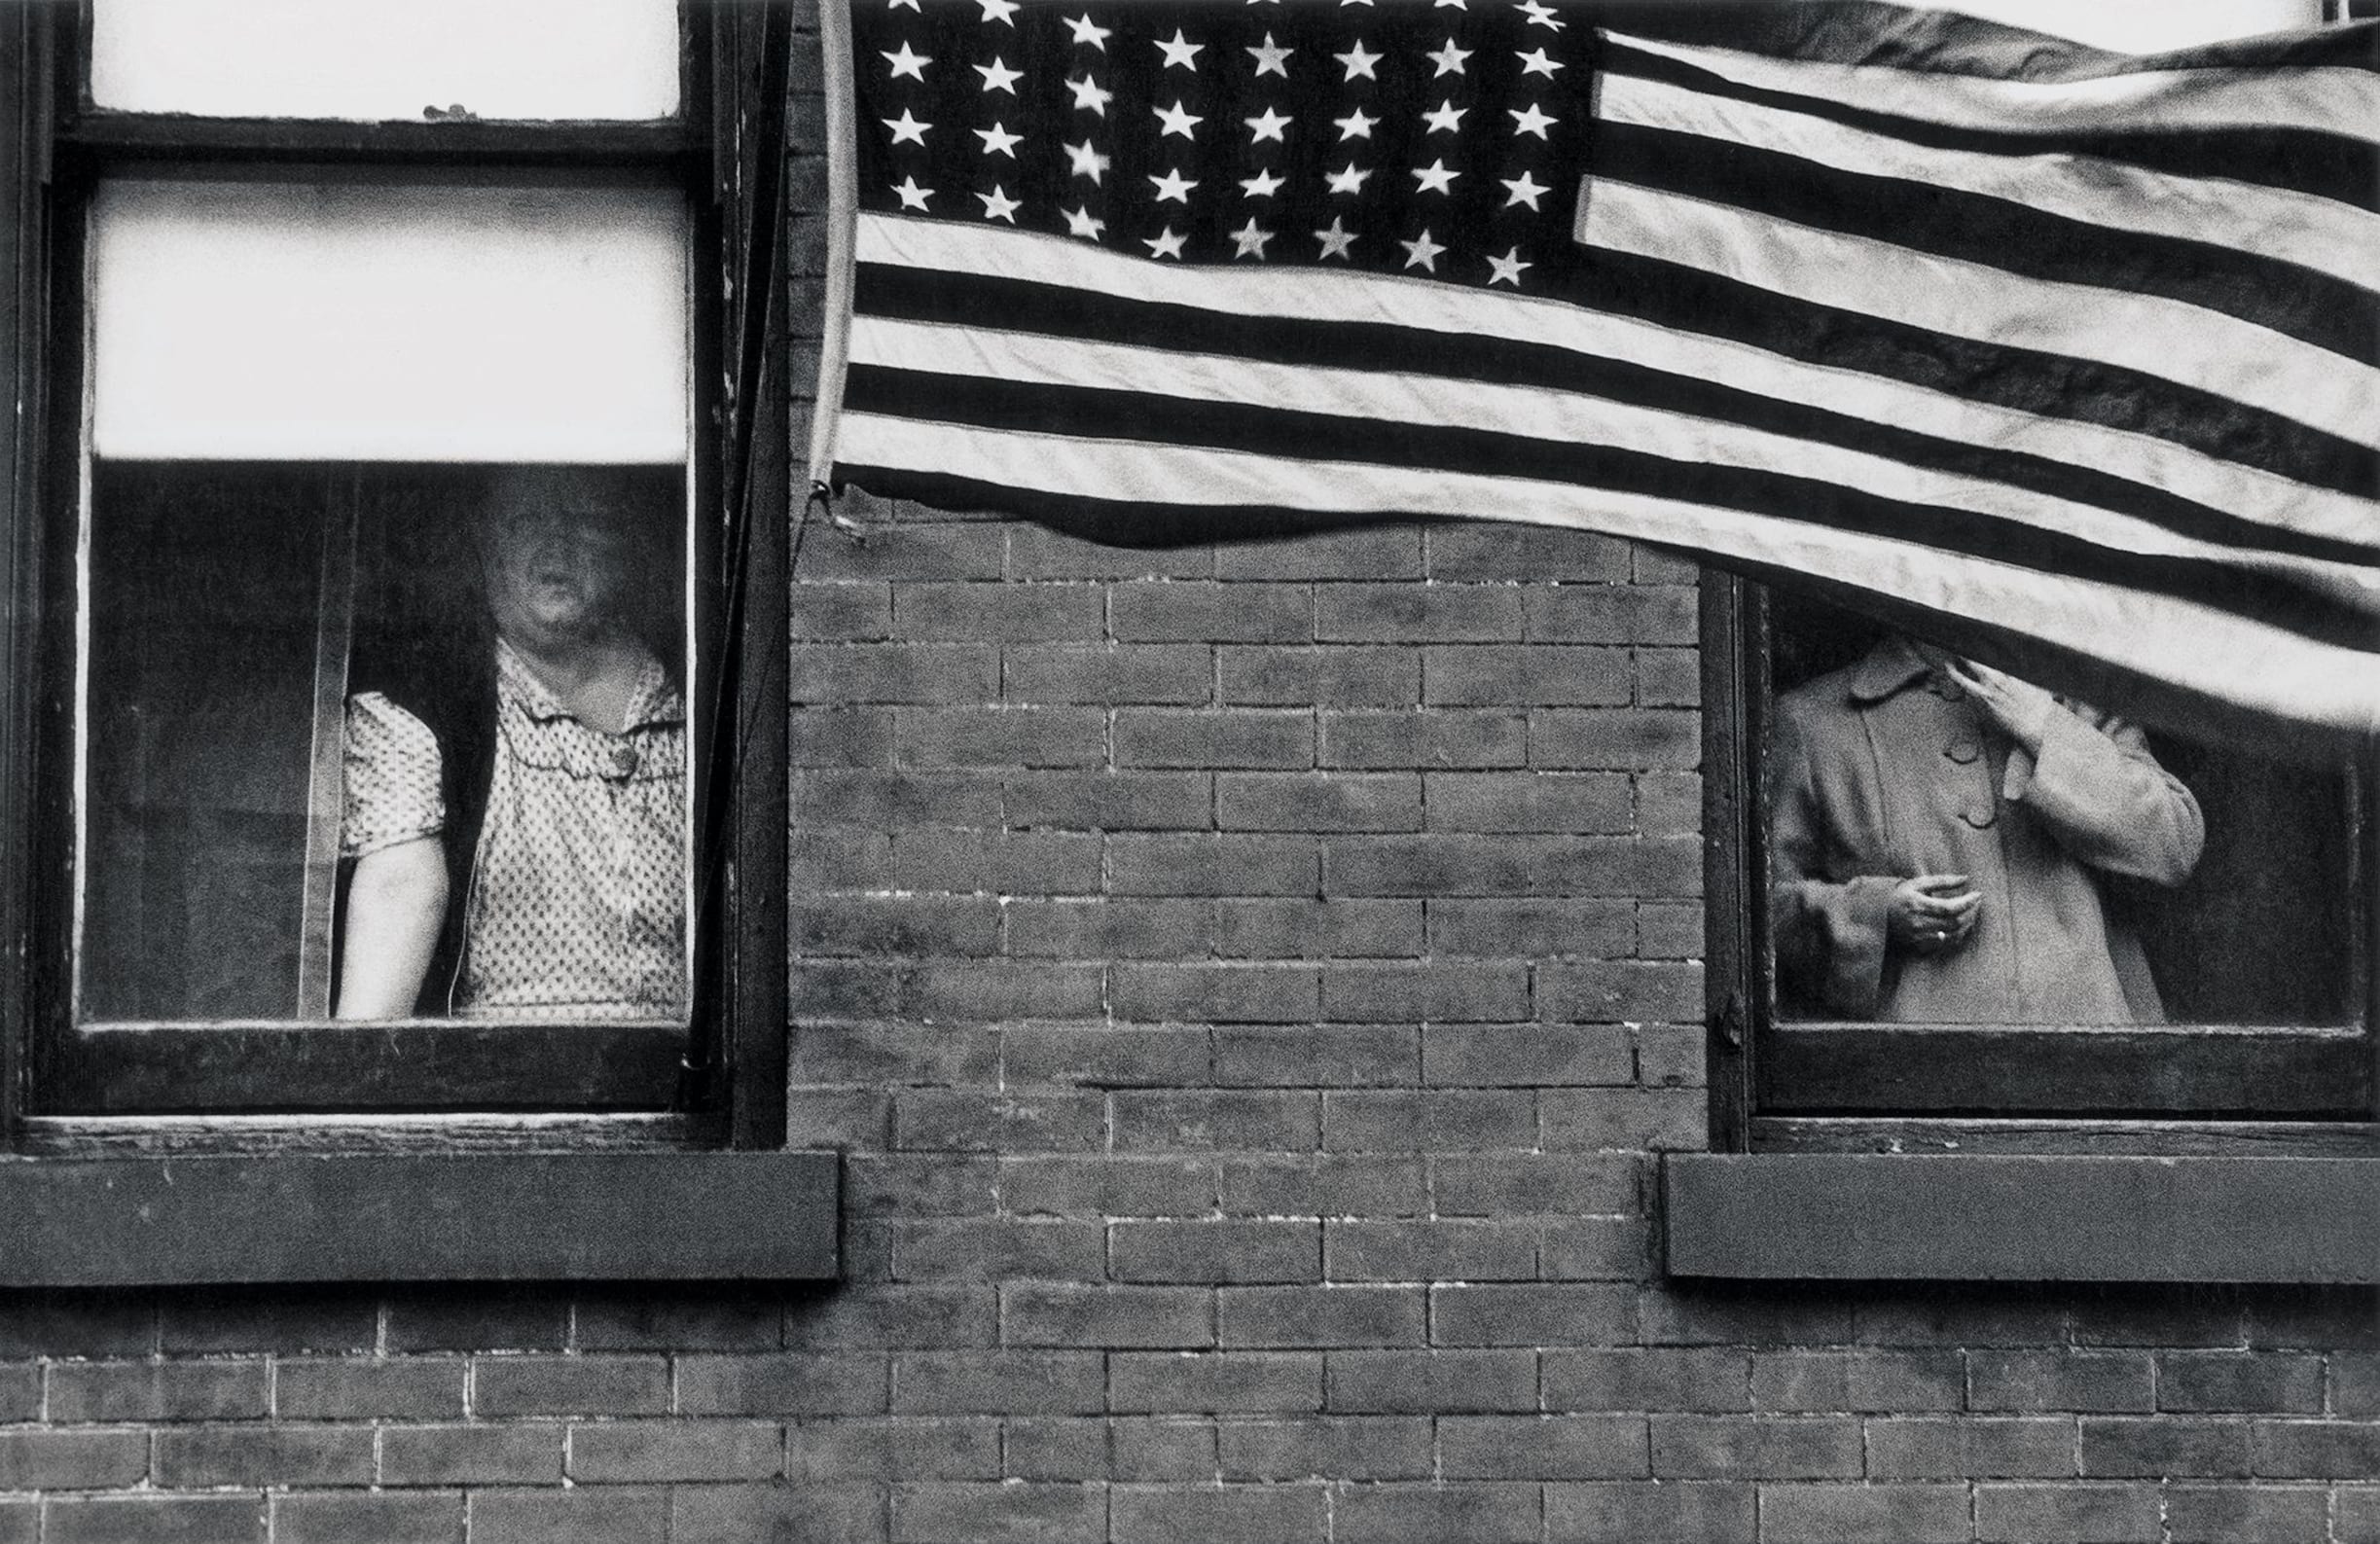 Robert Frank﻿, from the series ‘﻿﻿﻿The Americans’, 1955-1957﻿. Courtesy of the artist’s estate, Pace Gallery, and Galerie Thomas Zander.